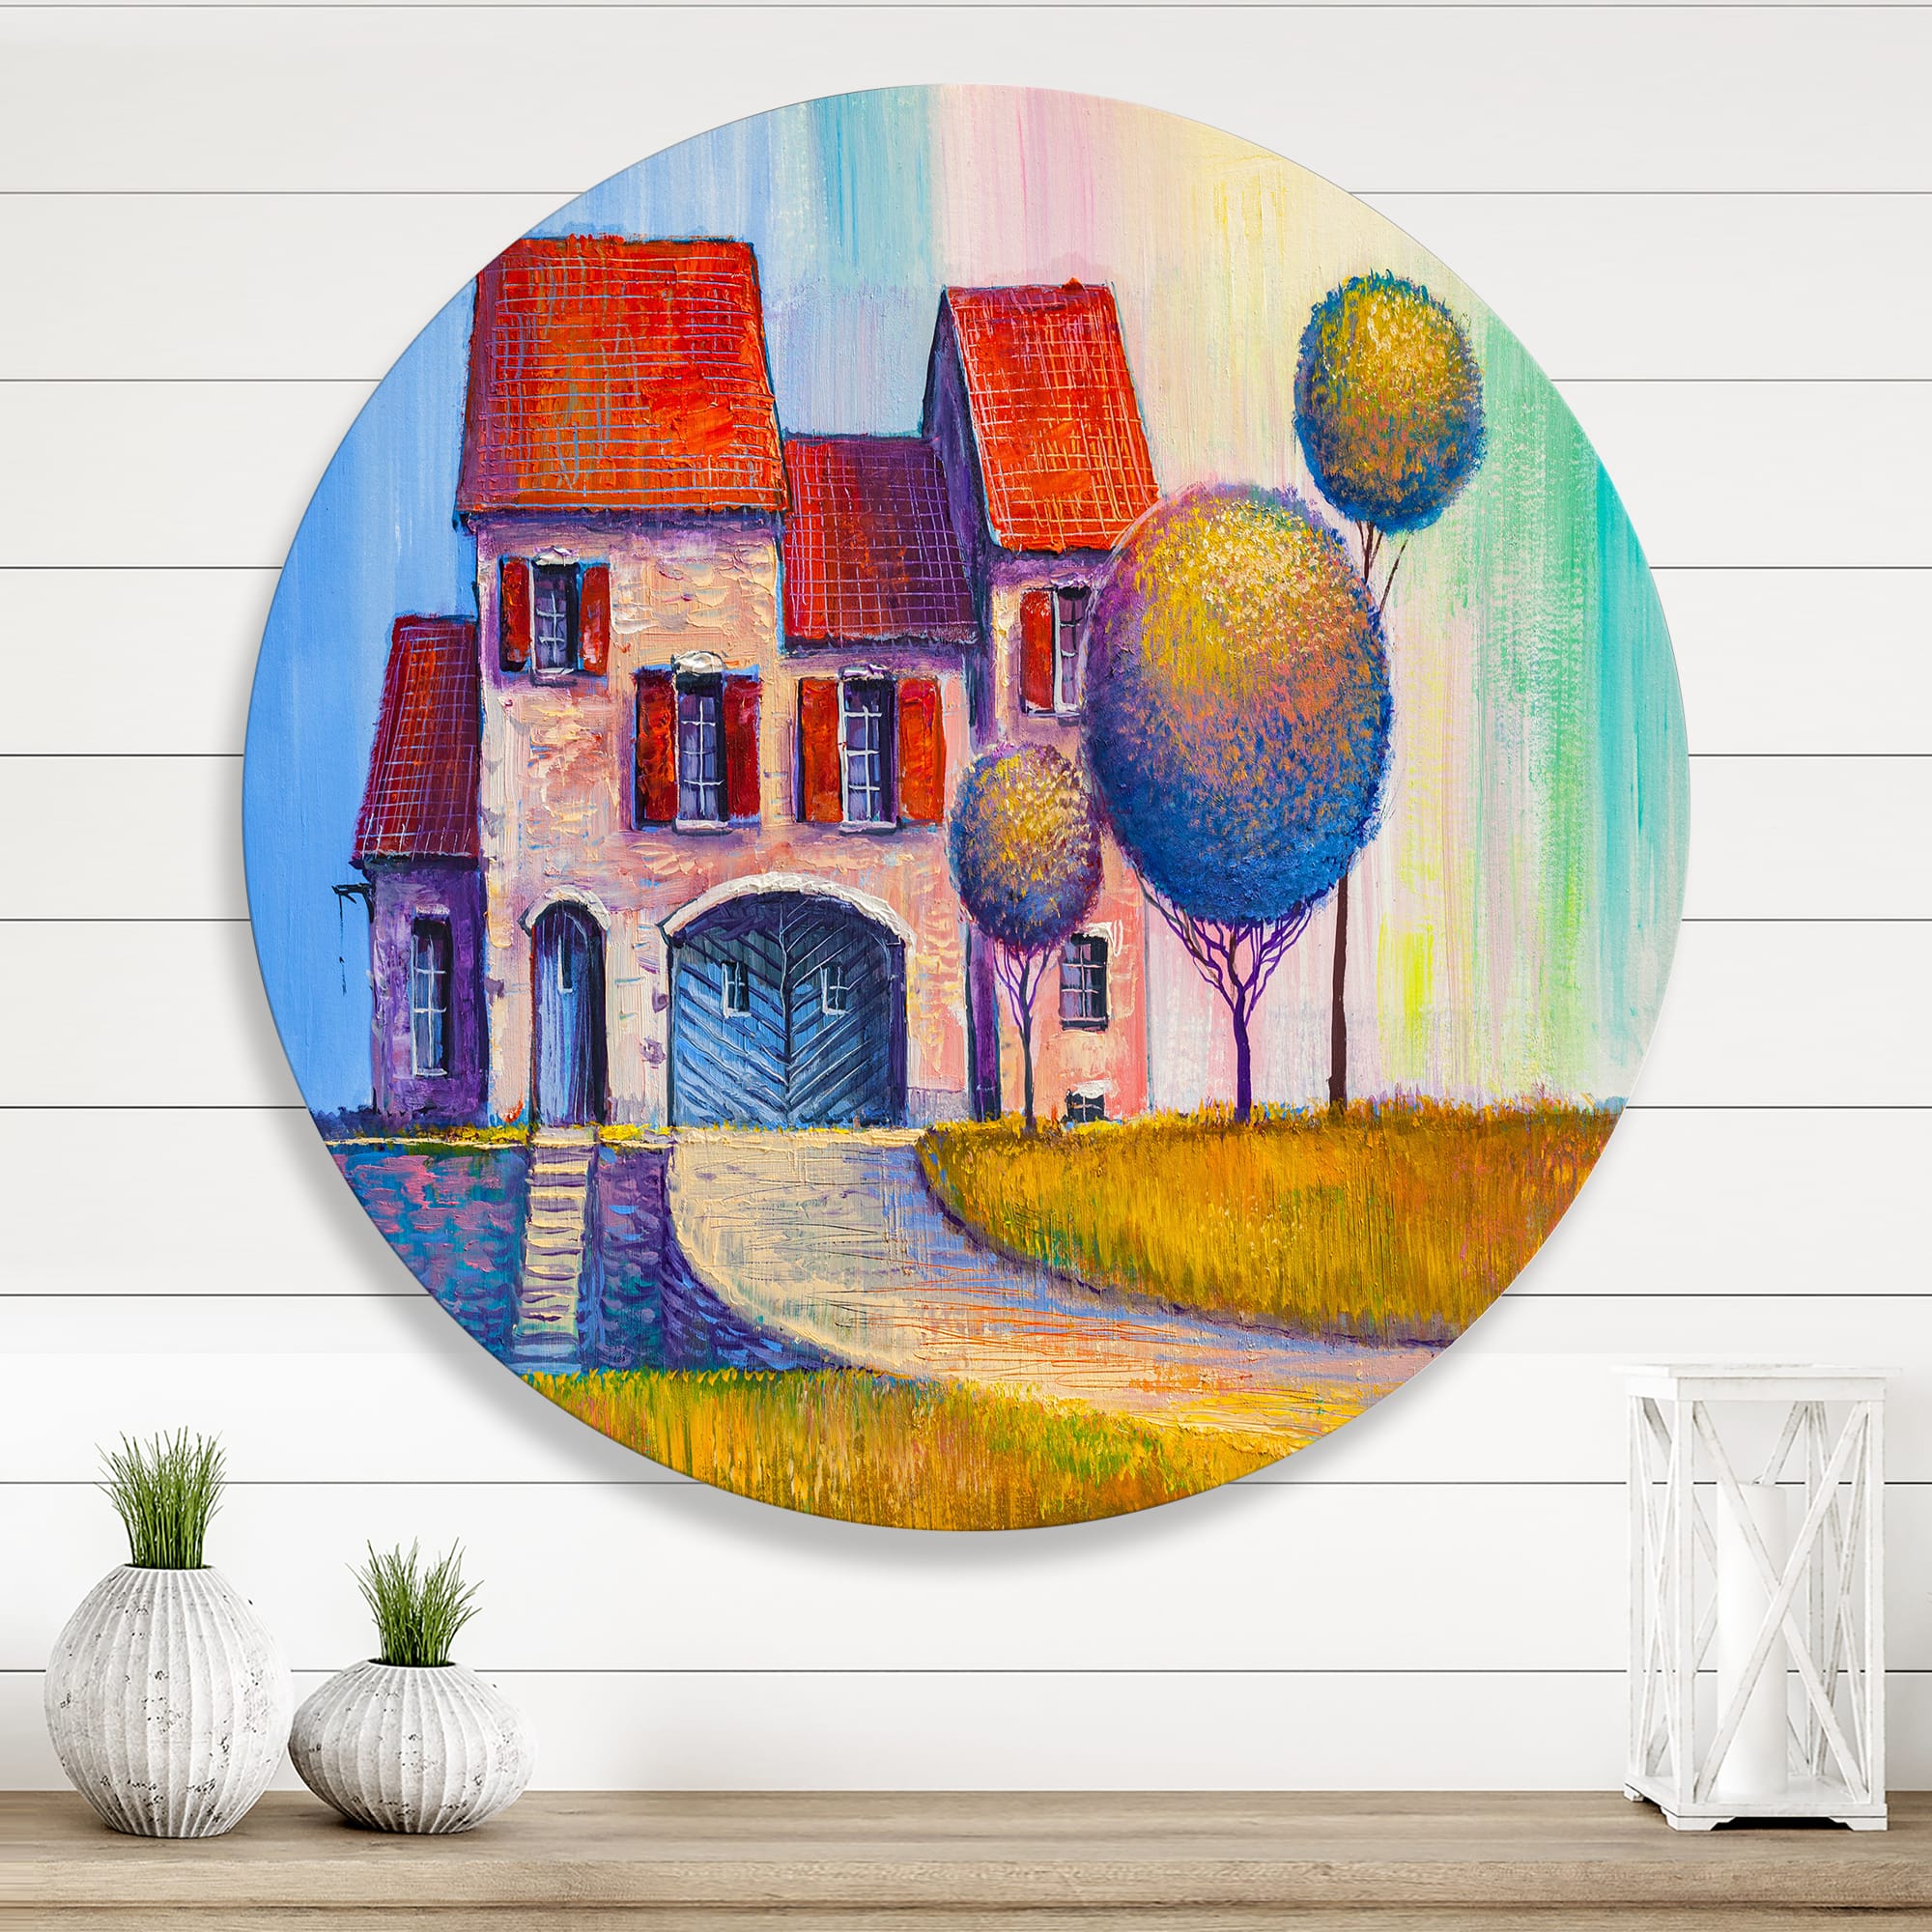 Designart - House With Red Roof In The Village - Modern Metal Circle Wall Art